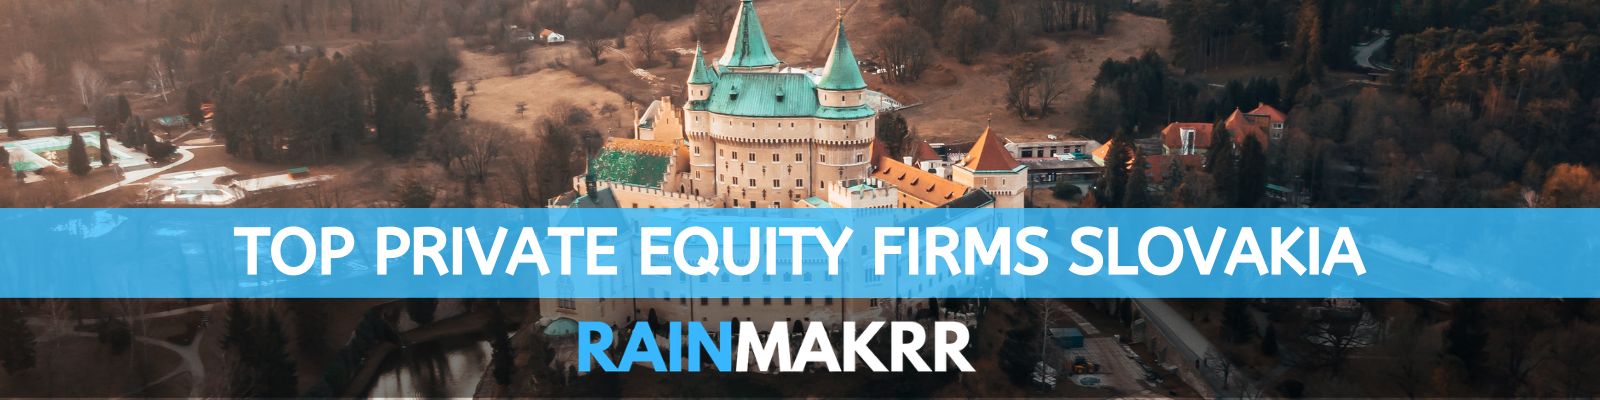 TOP PRIVATE EQUITY FIRMS SLOVAKIA